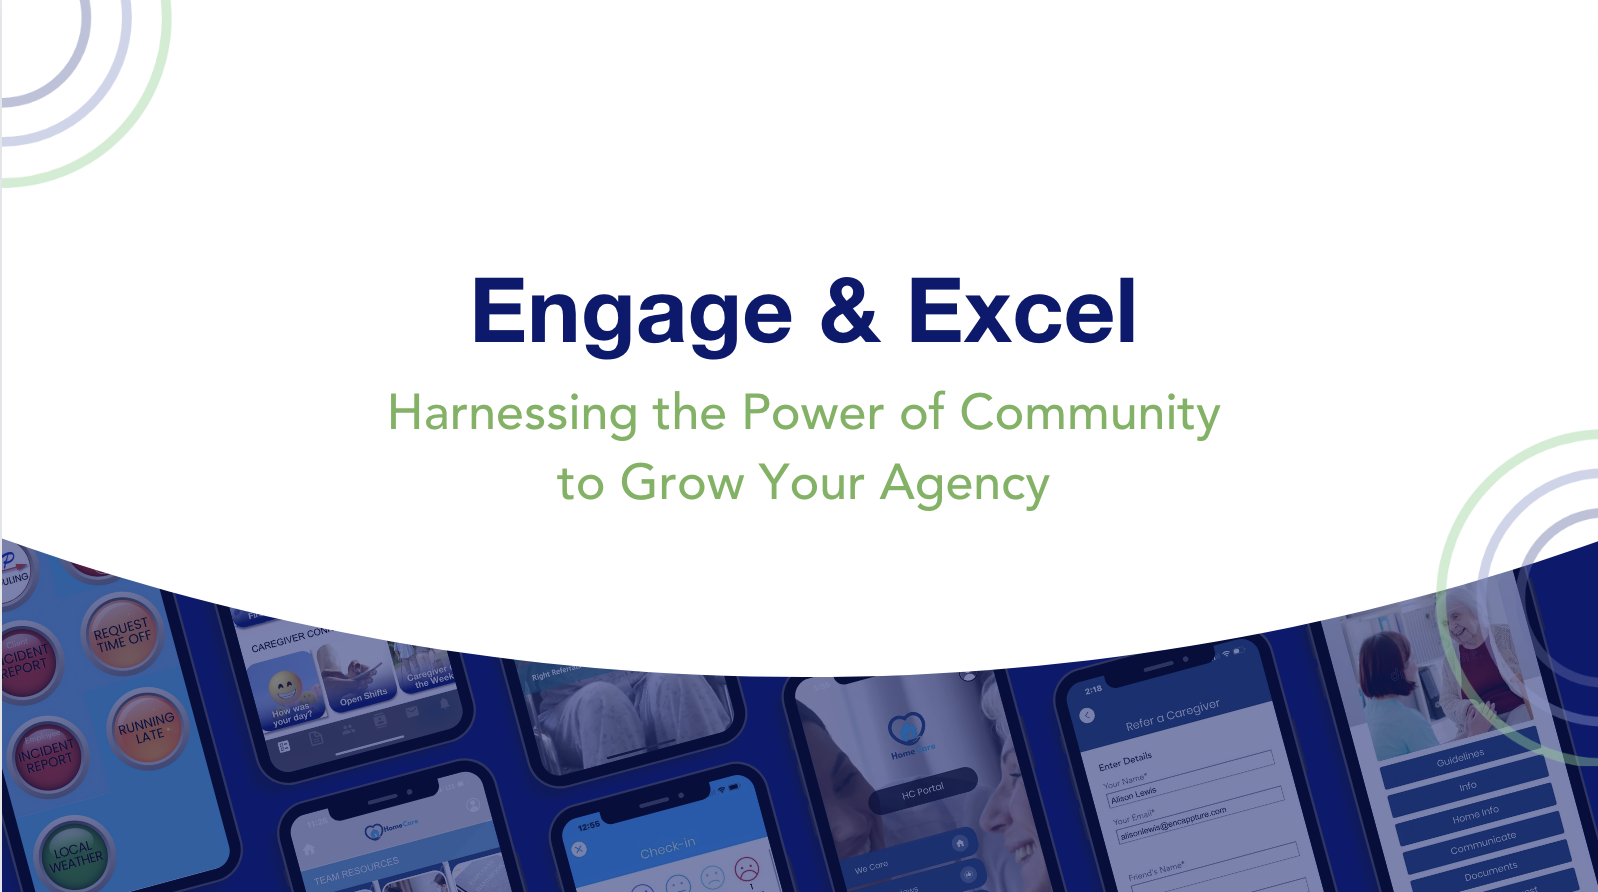 Engage and Excel Harnessing the Power of Community to Grow Your Agency